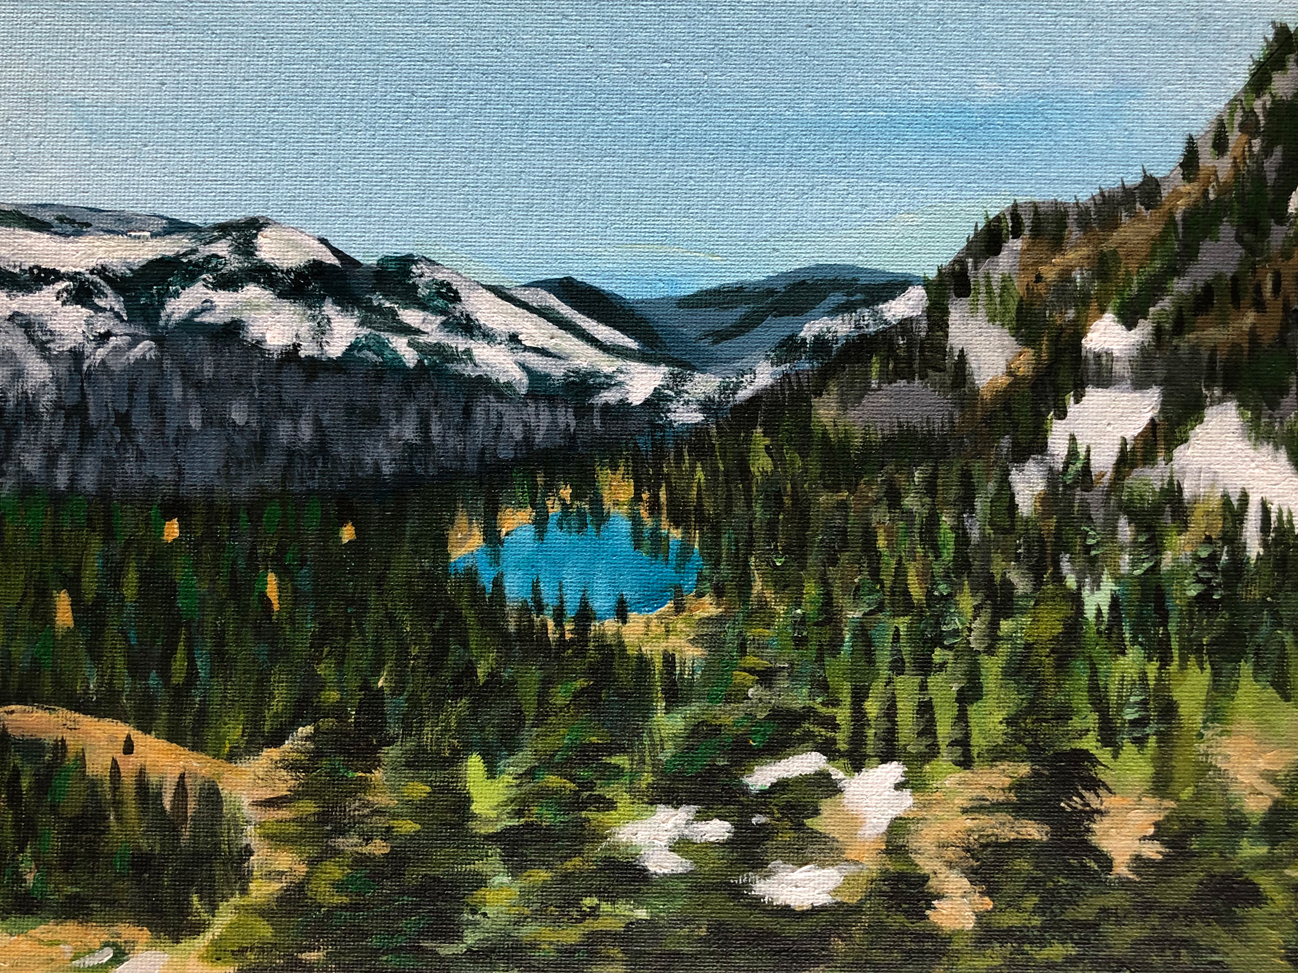 Joanna Young | Sheep Lake to Sourdough Gap, 2020 | Acrylic on canvas panel, 9 x 12 inches